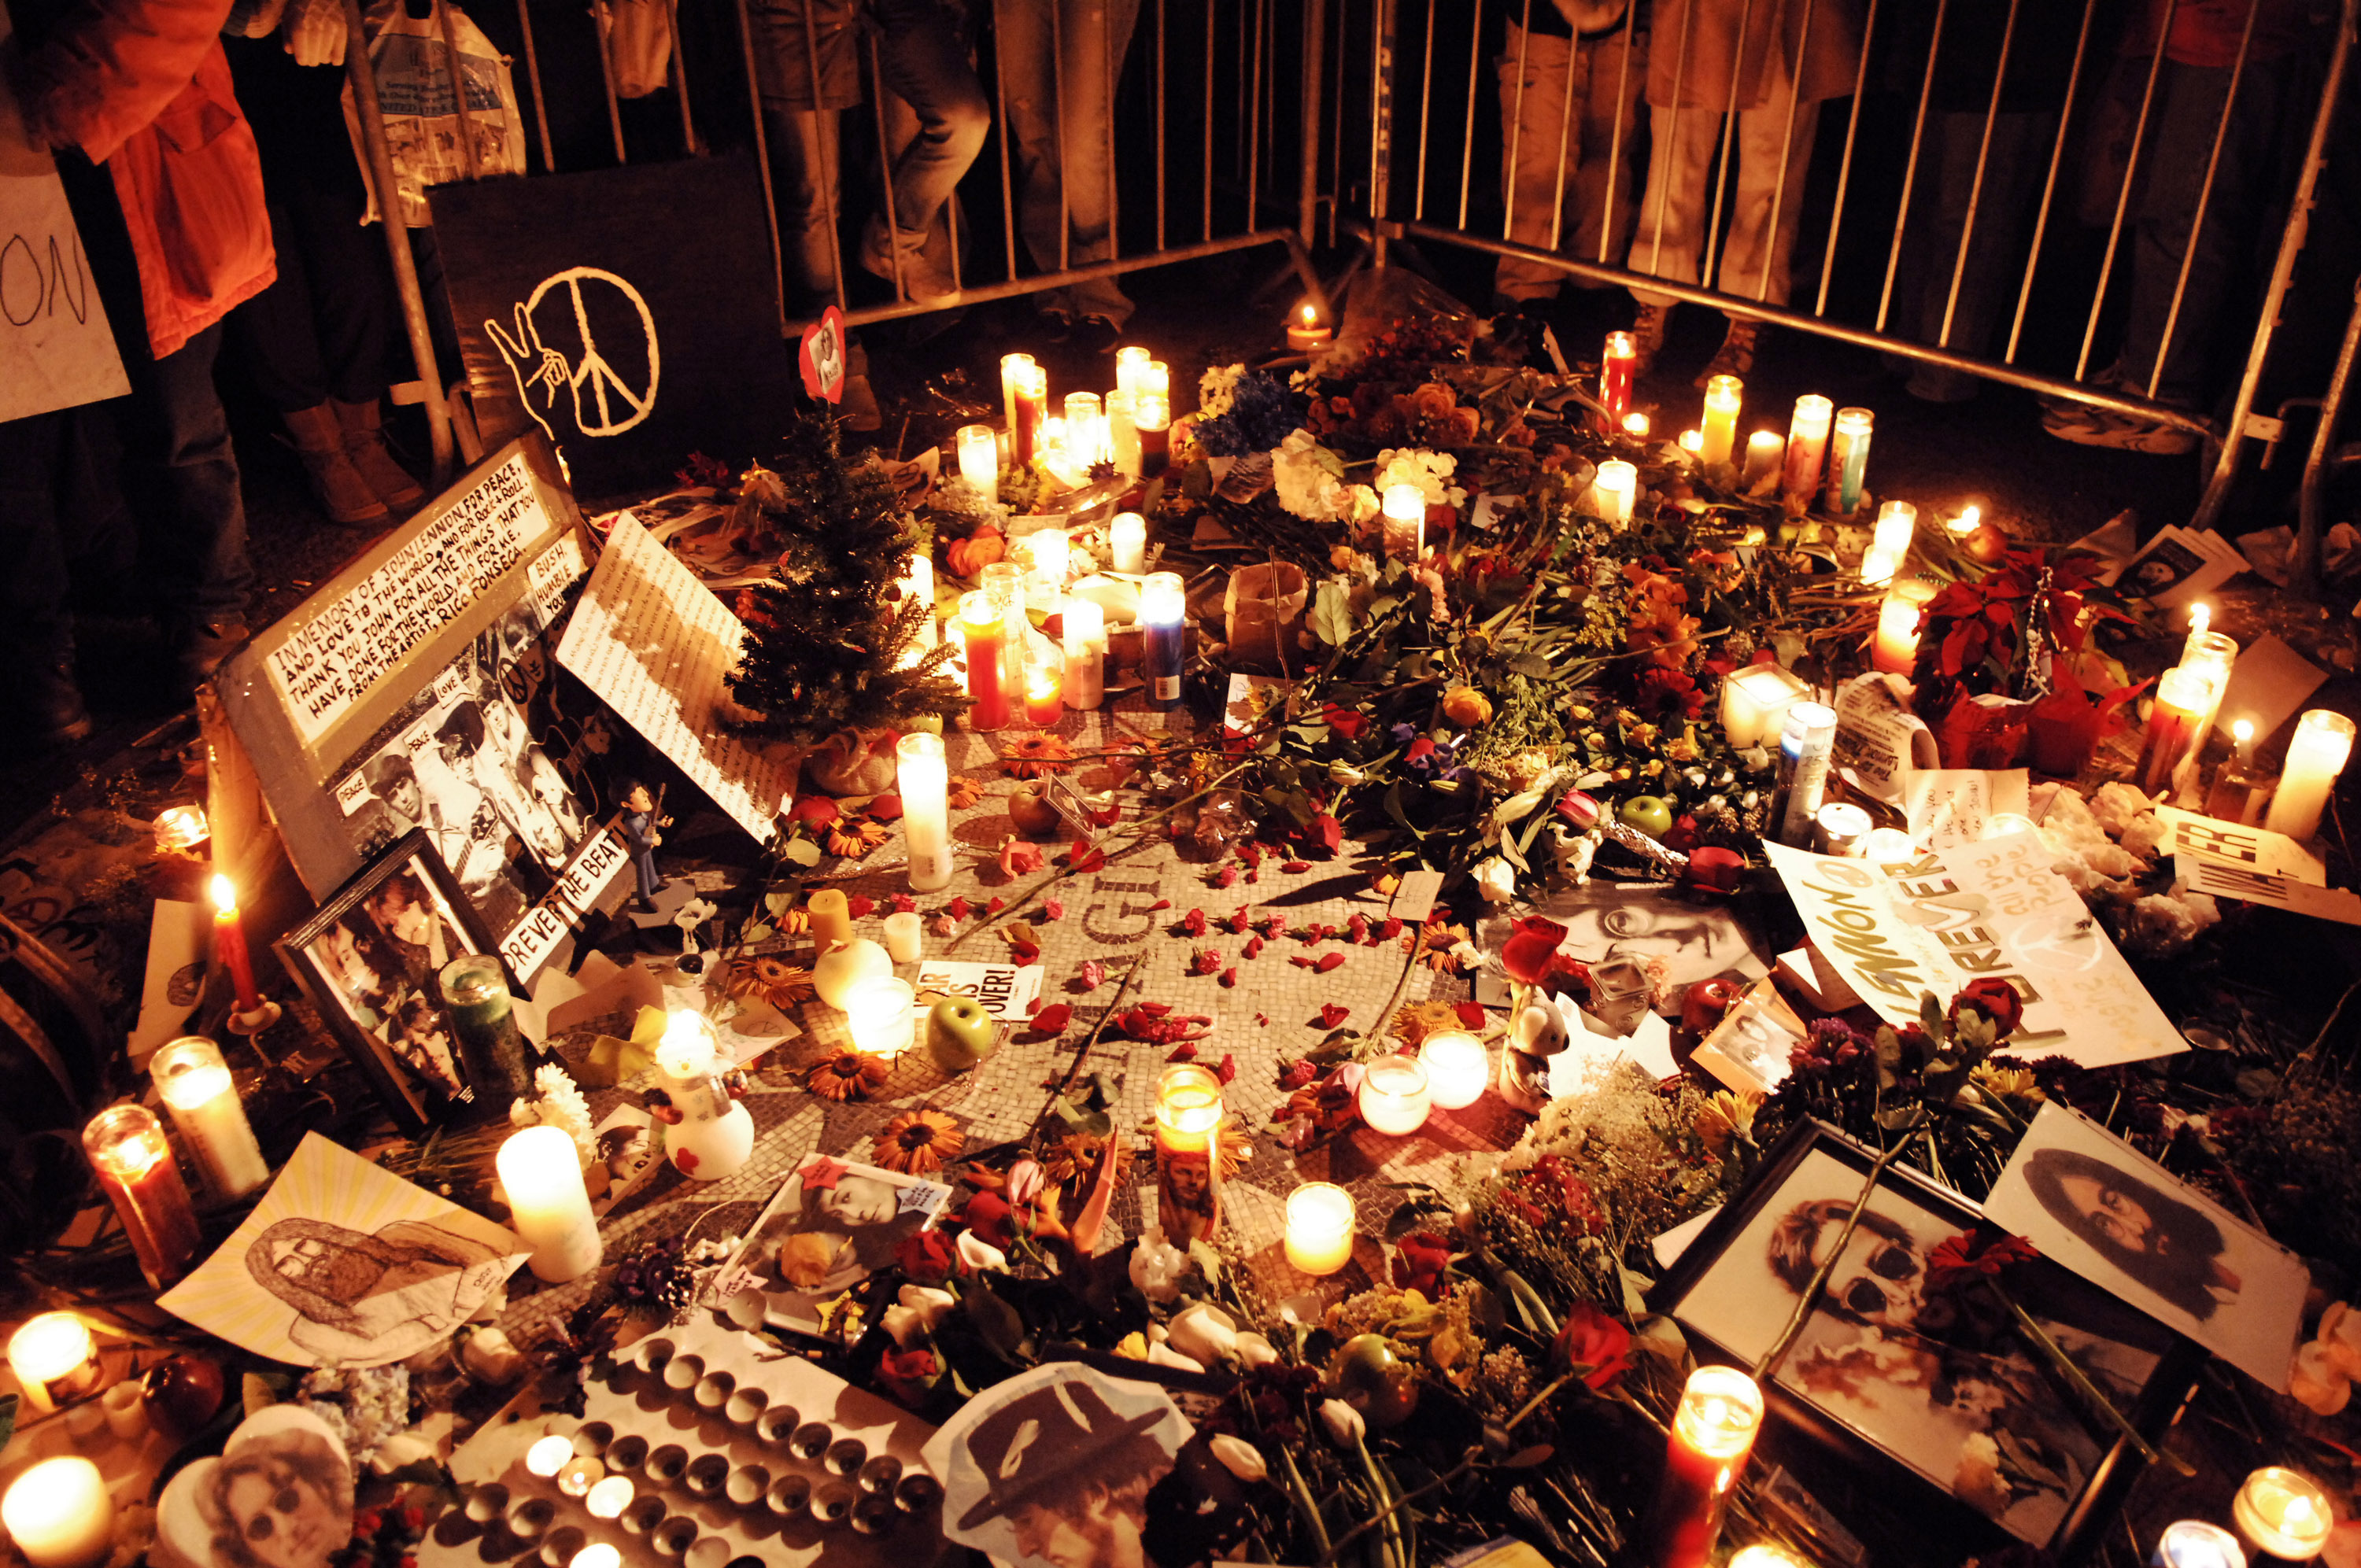 Photos, flowers, and candles at a John Lennon memorial